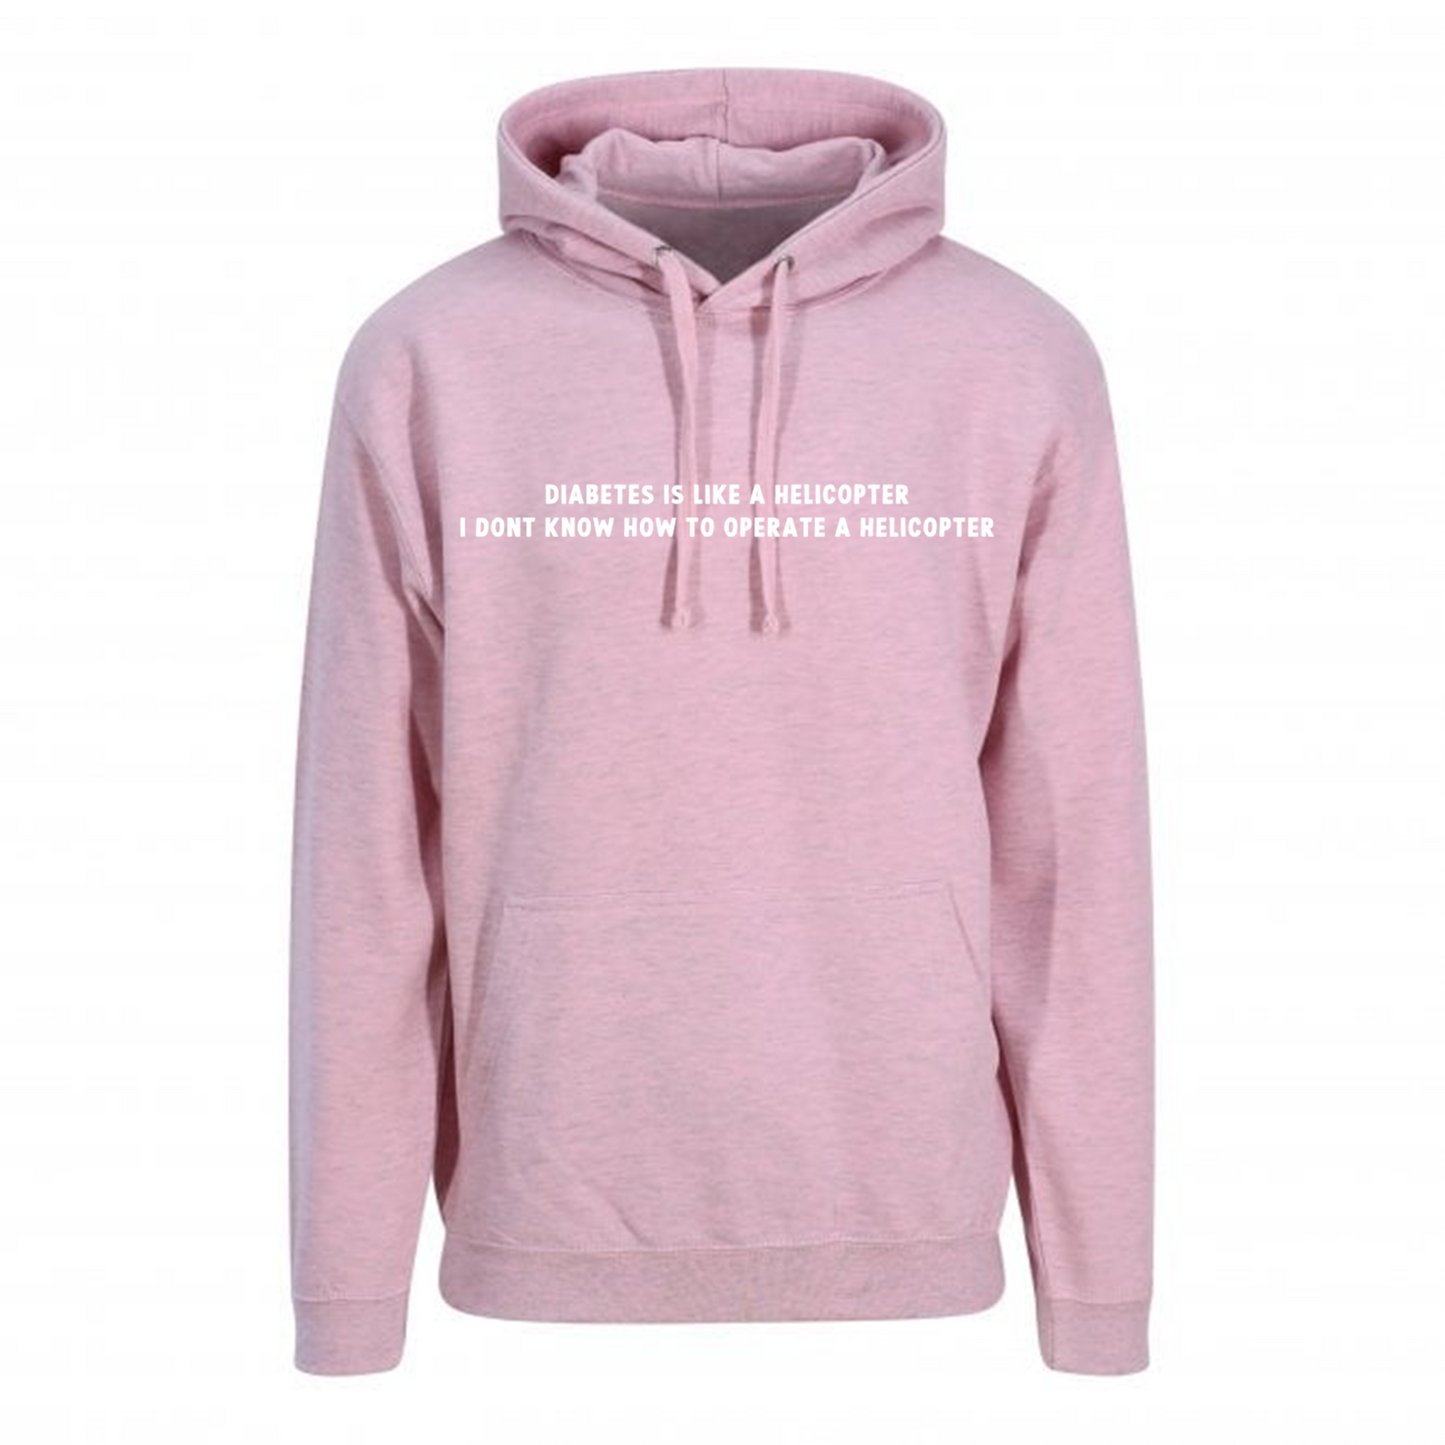 Diabetes Is Like A Helicopter, I Dont Know How To Operate A Helicopter Pastel Hoodie